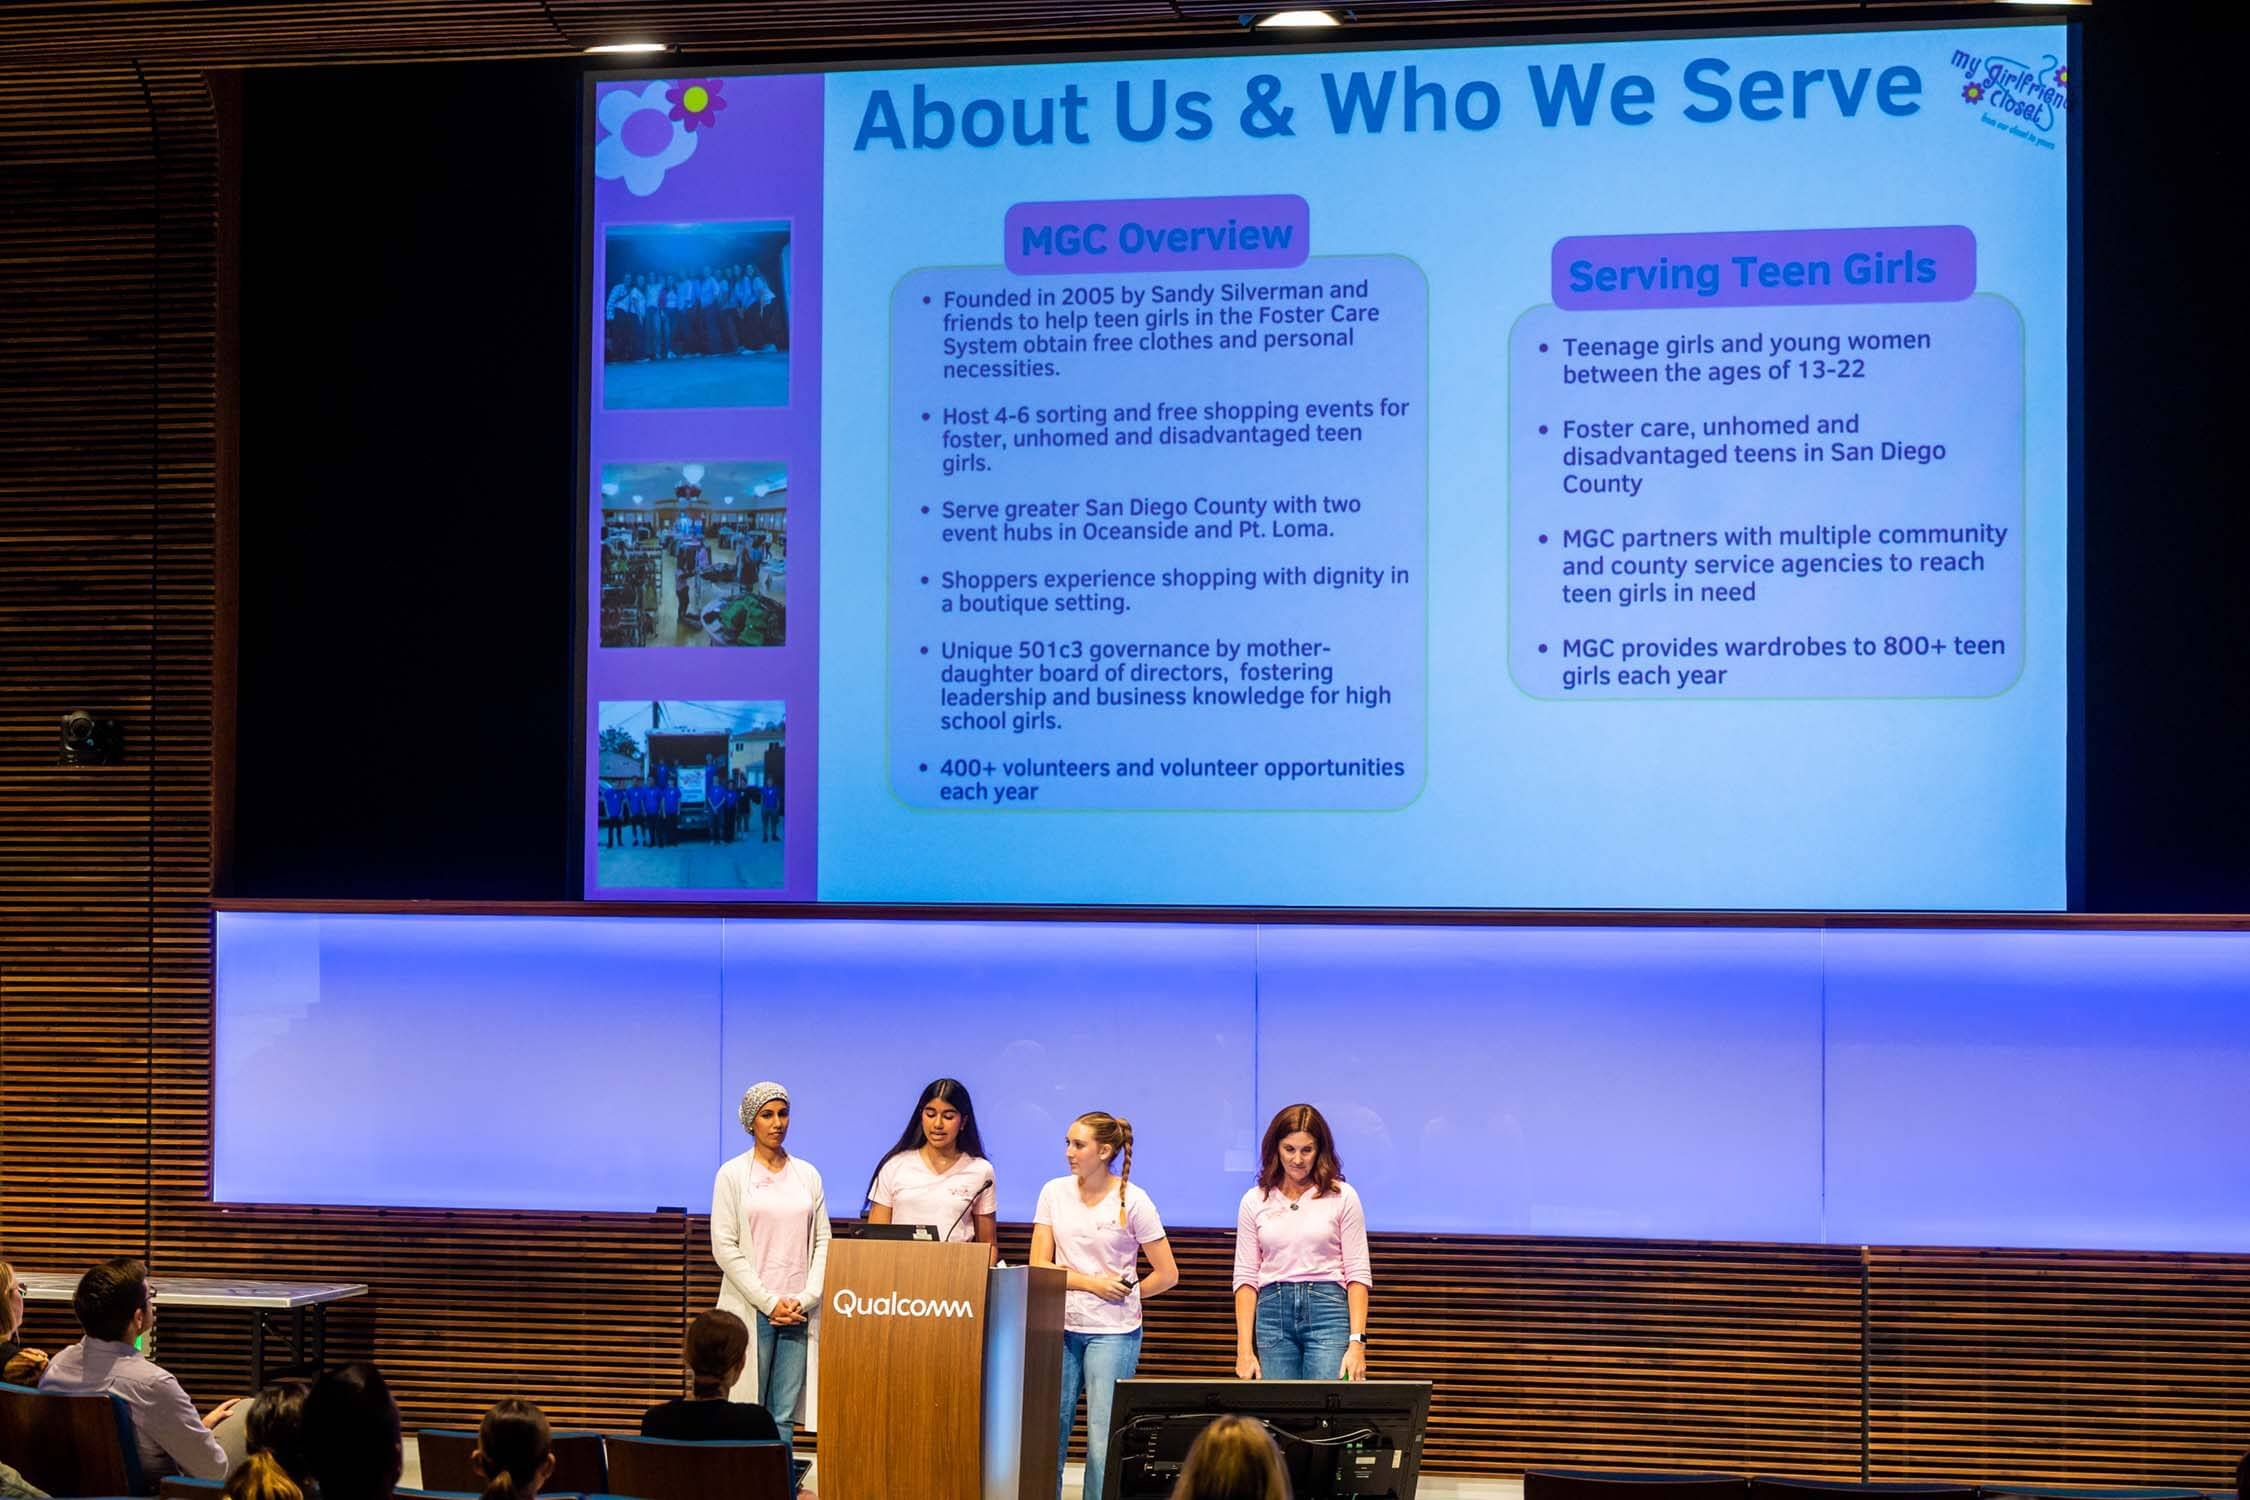 nonprofit-group-giving-presentation-at-qualcomm-event-about-the-mission-of-their-organization.jpg